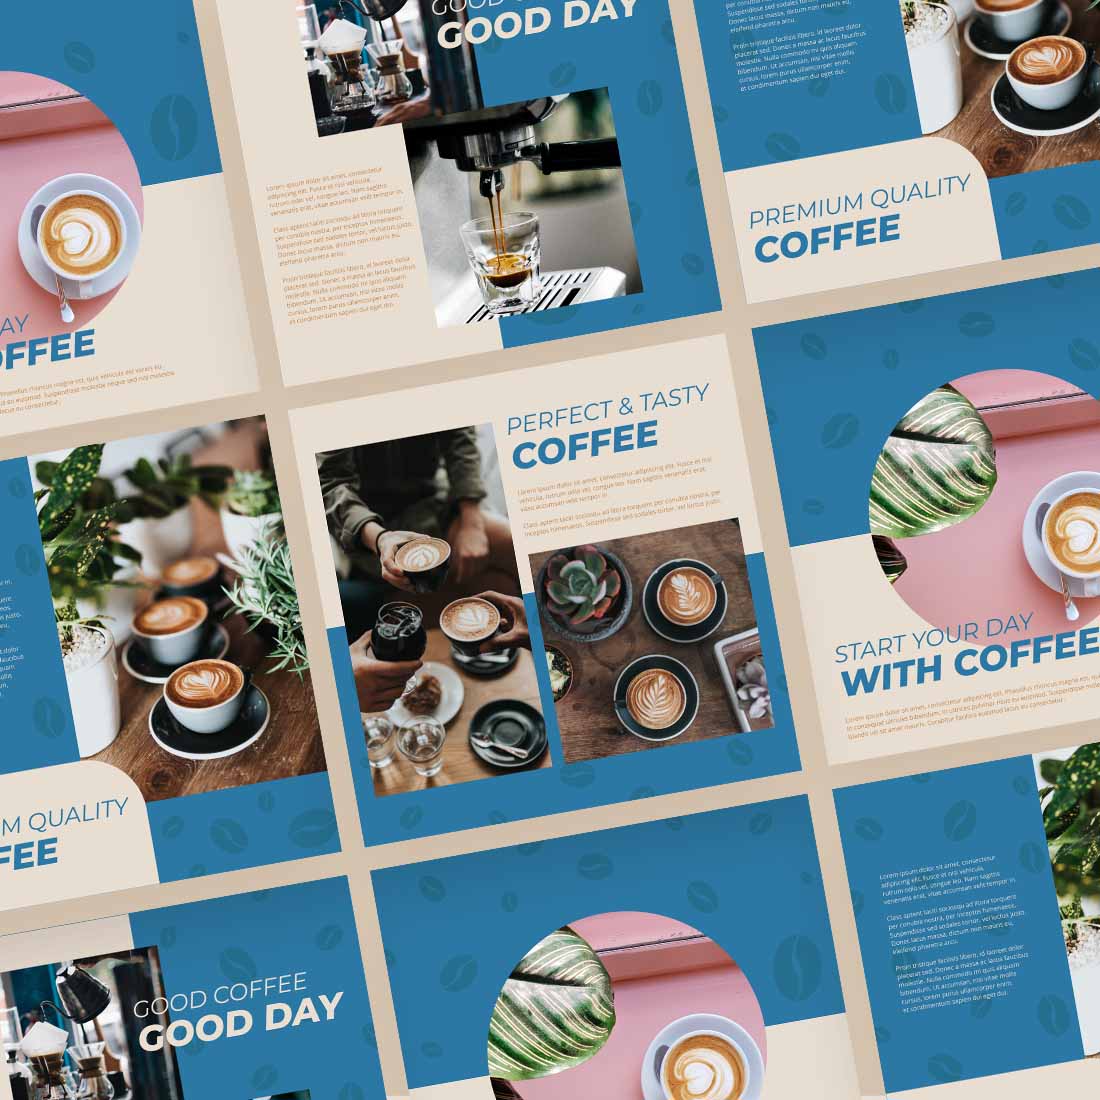 4 Coffee Shop Social Media Banner Template created by ner.dsgn.